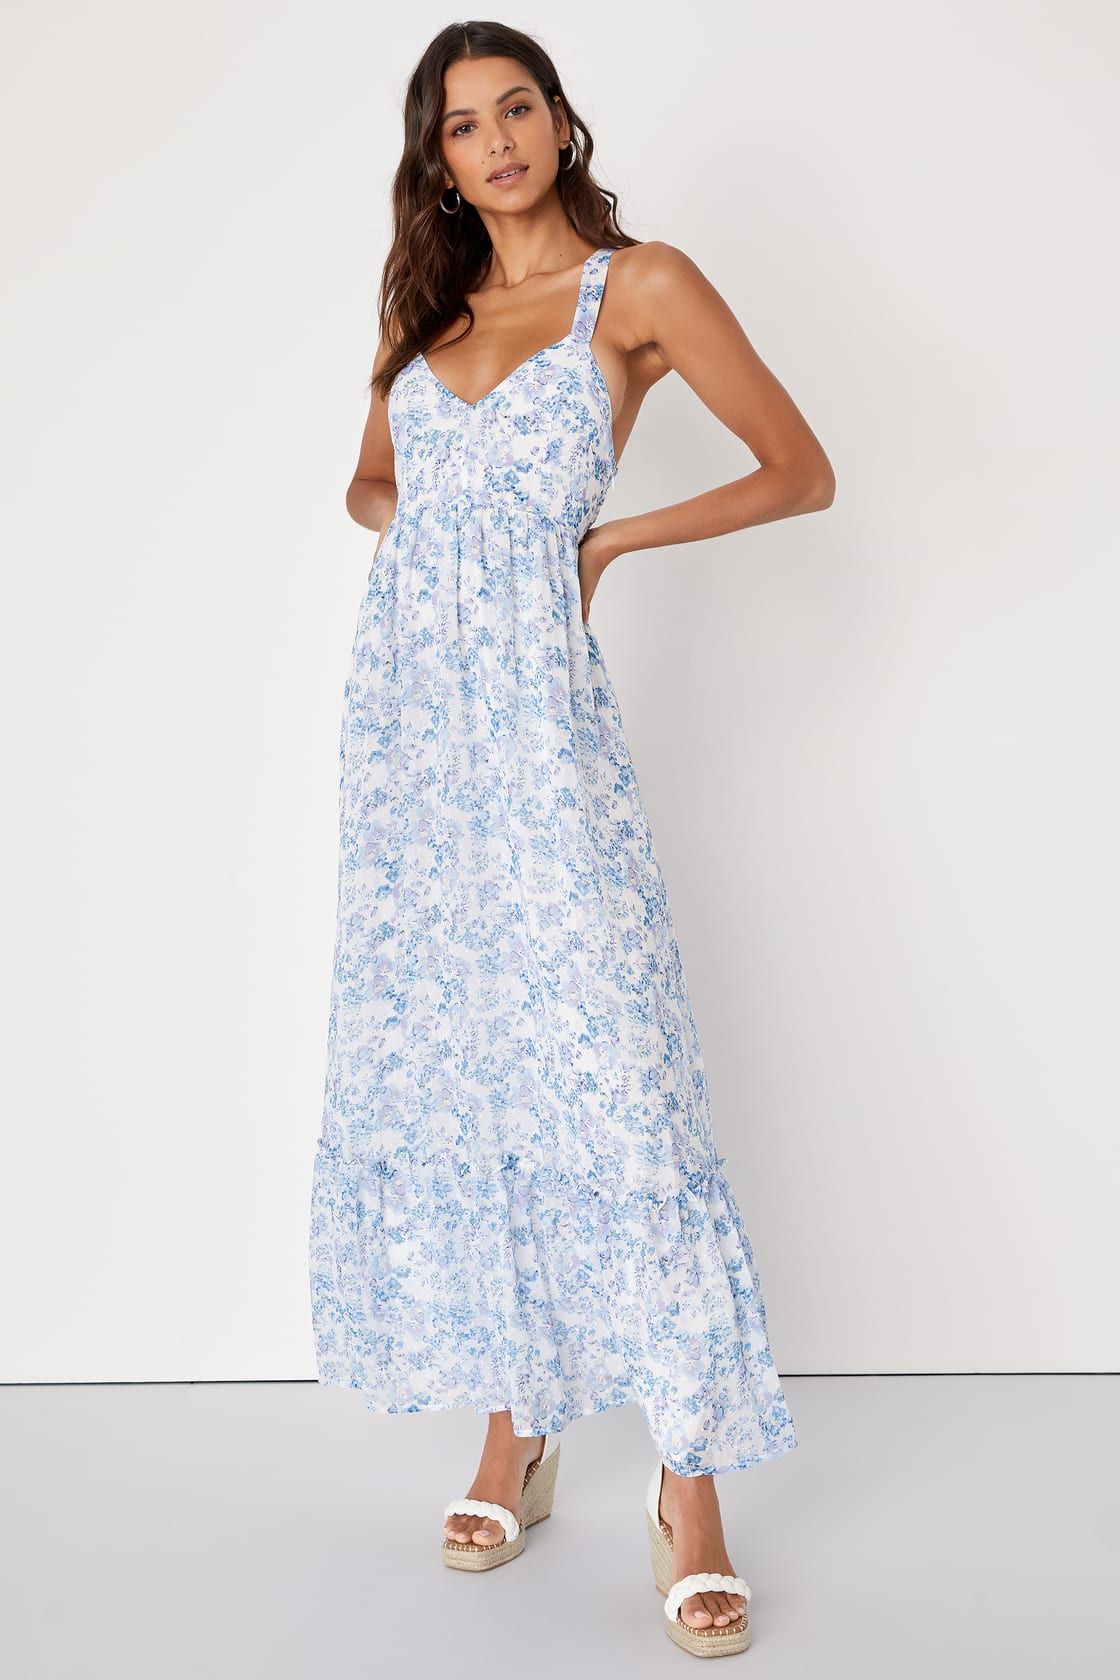 My Love Story White Floral Print Tie-Back Maxi Dress | Lulus